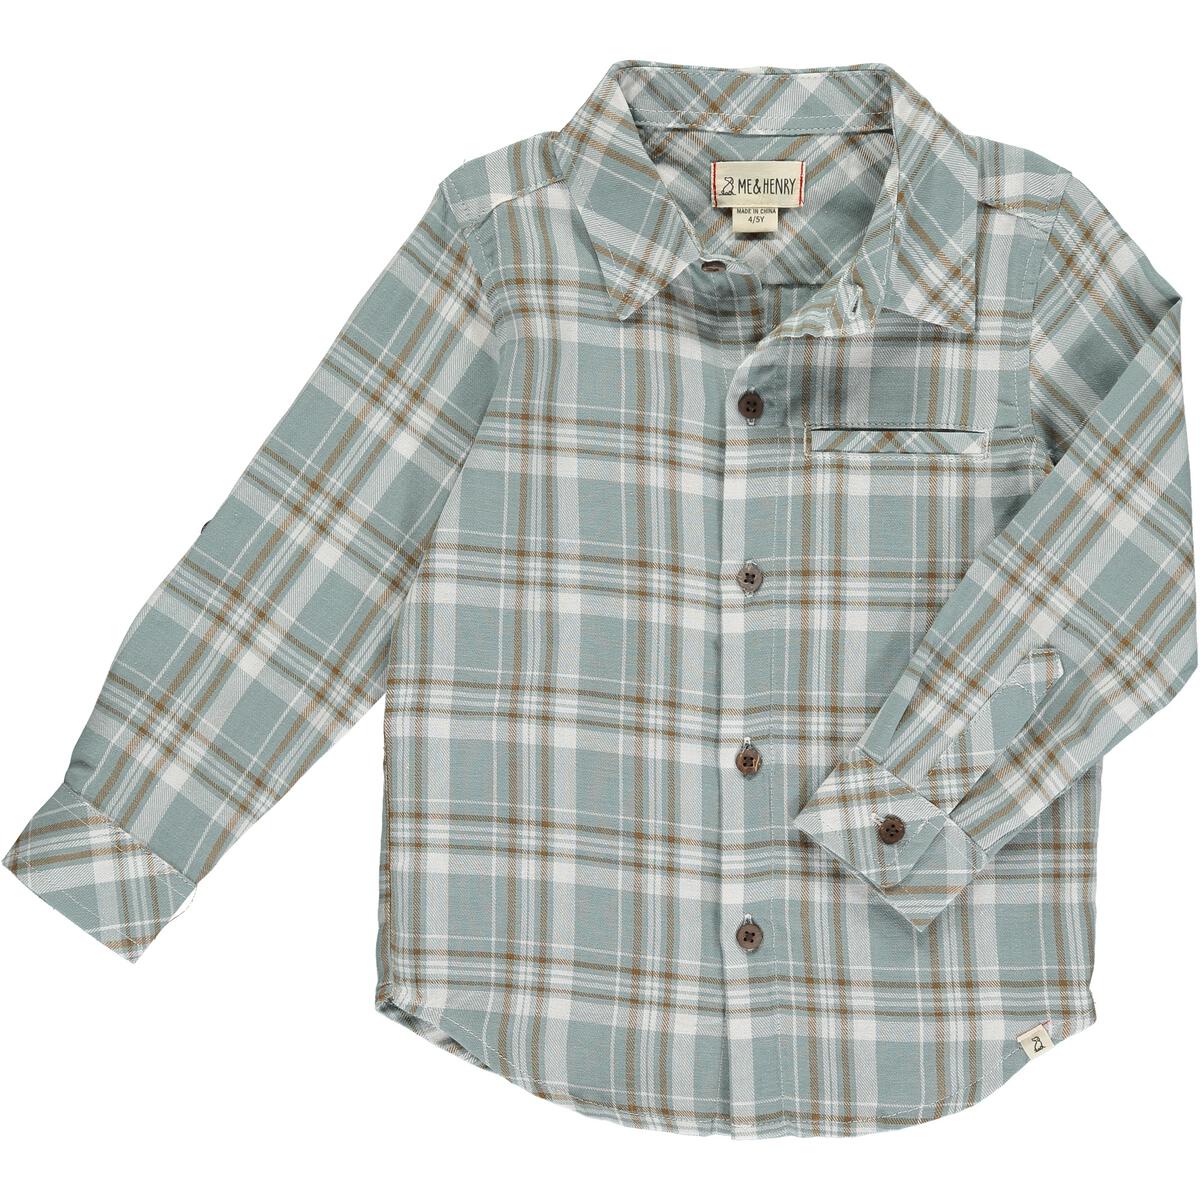 Me & Henry -Atwood Blue & White Plaid Woven Shirt